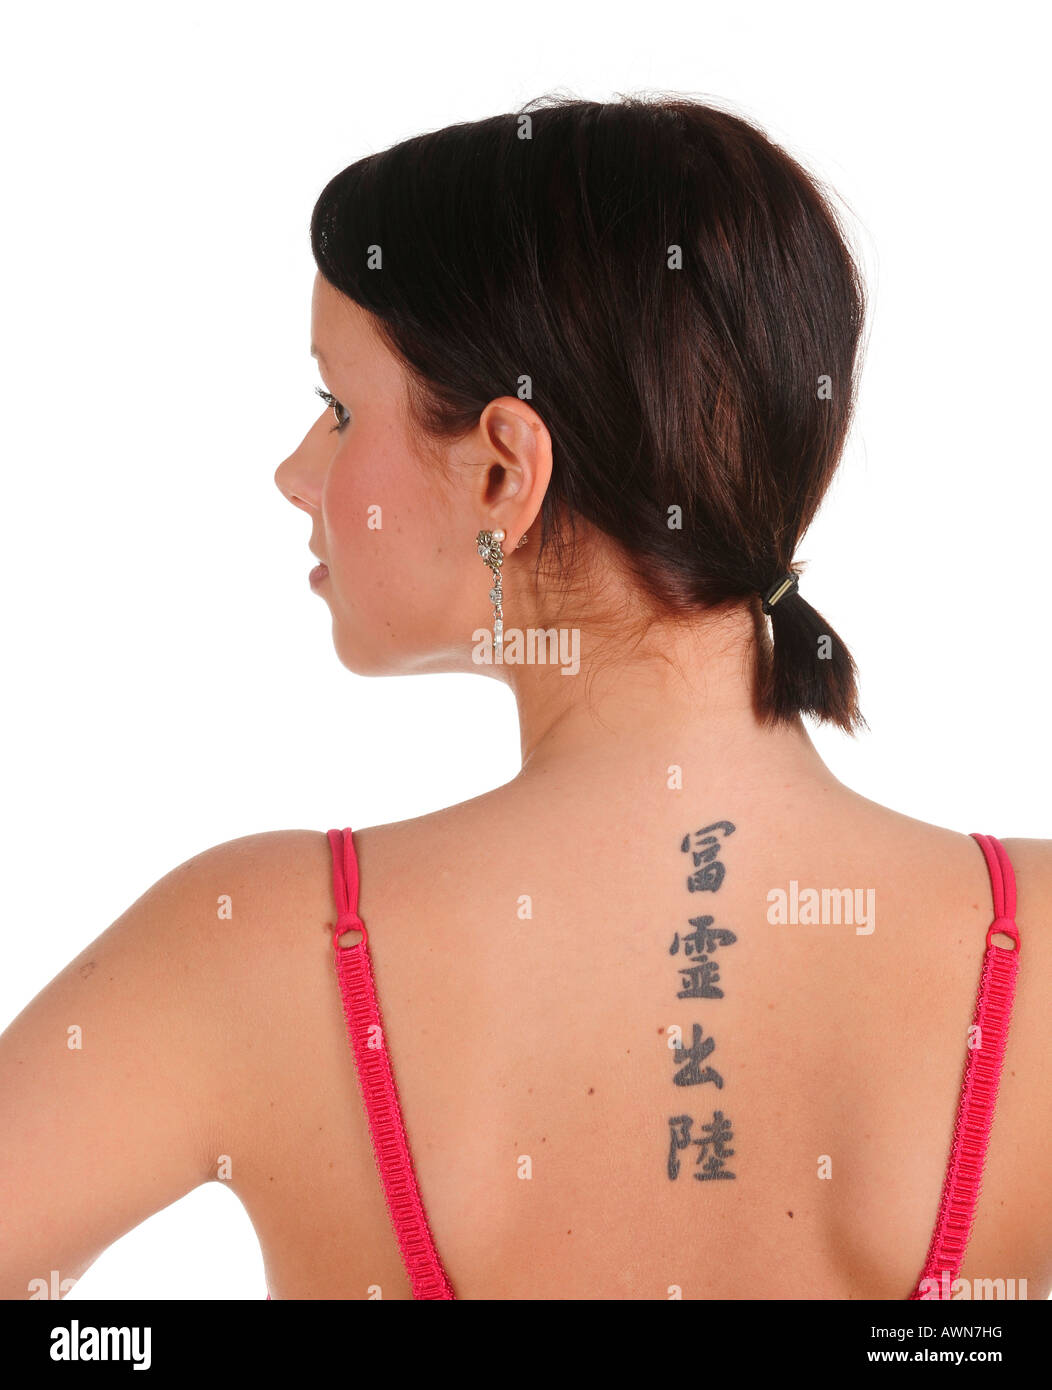 Young woman with tattoo Stock Photo